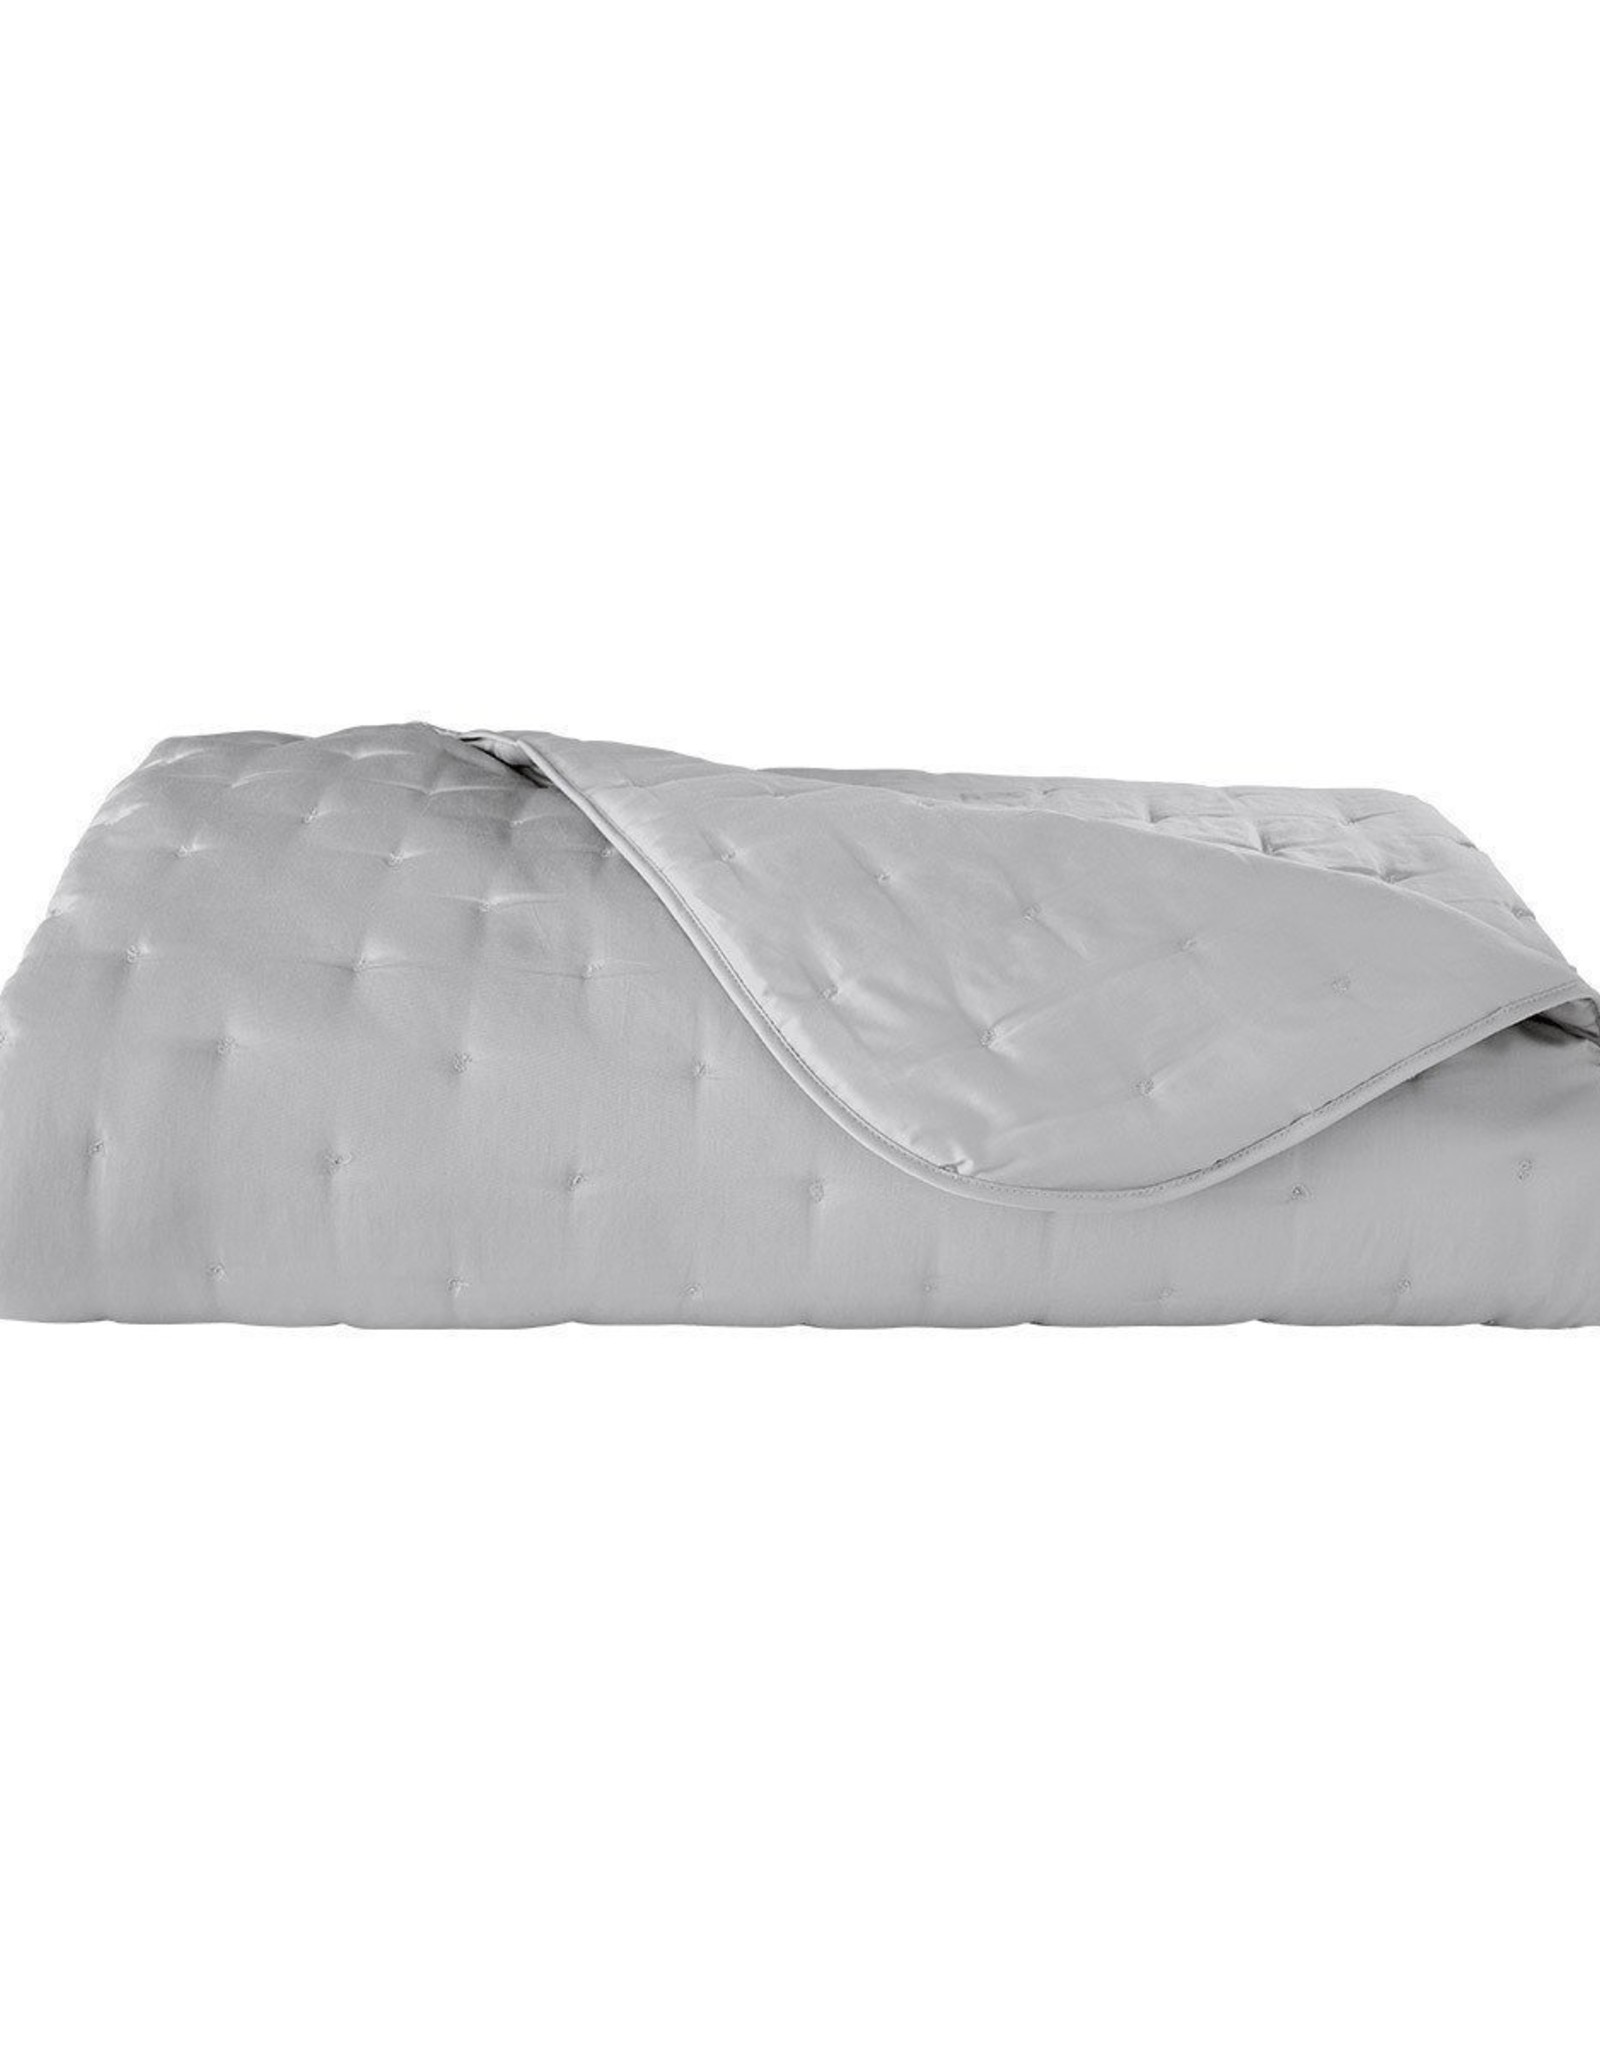 Yves Delorme Triomphe Quilted Coverlet